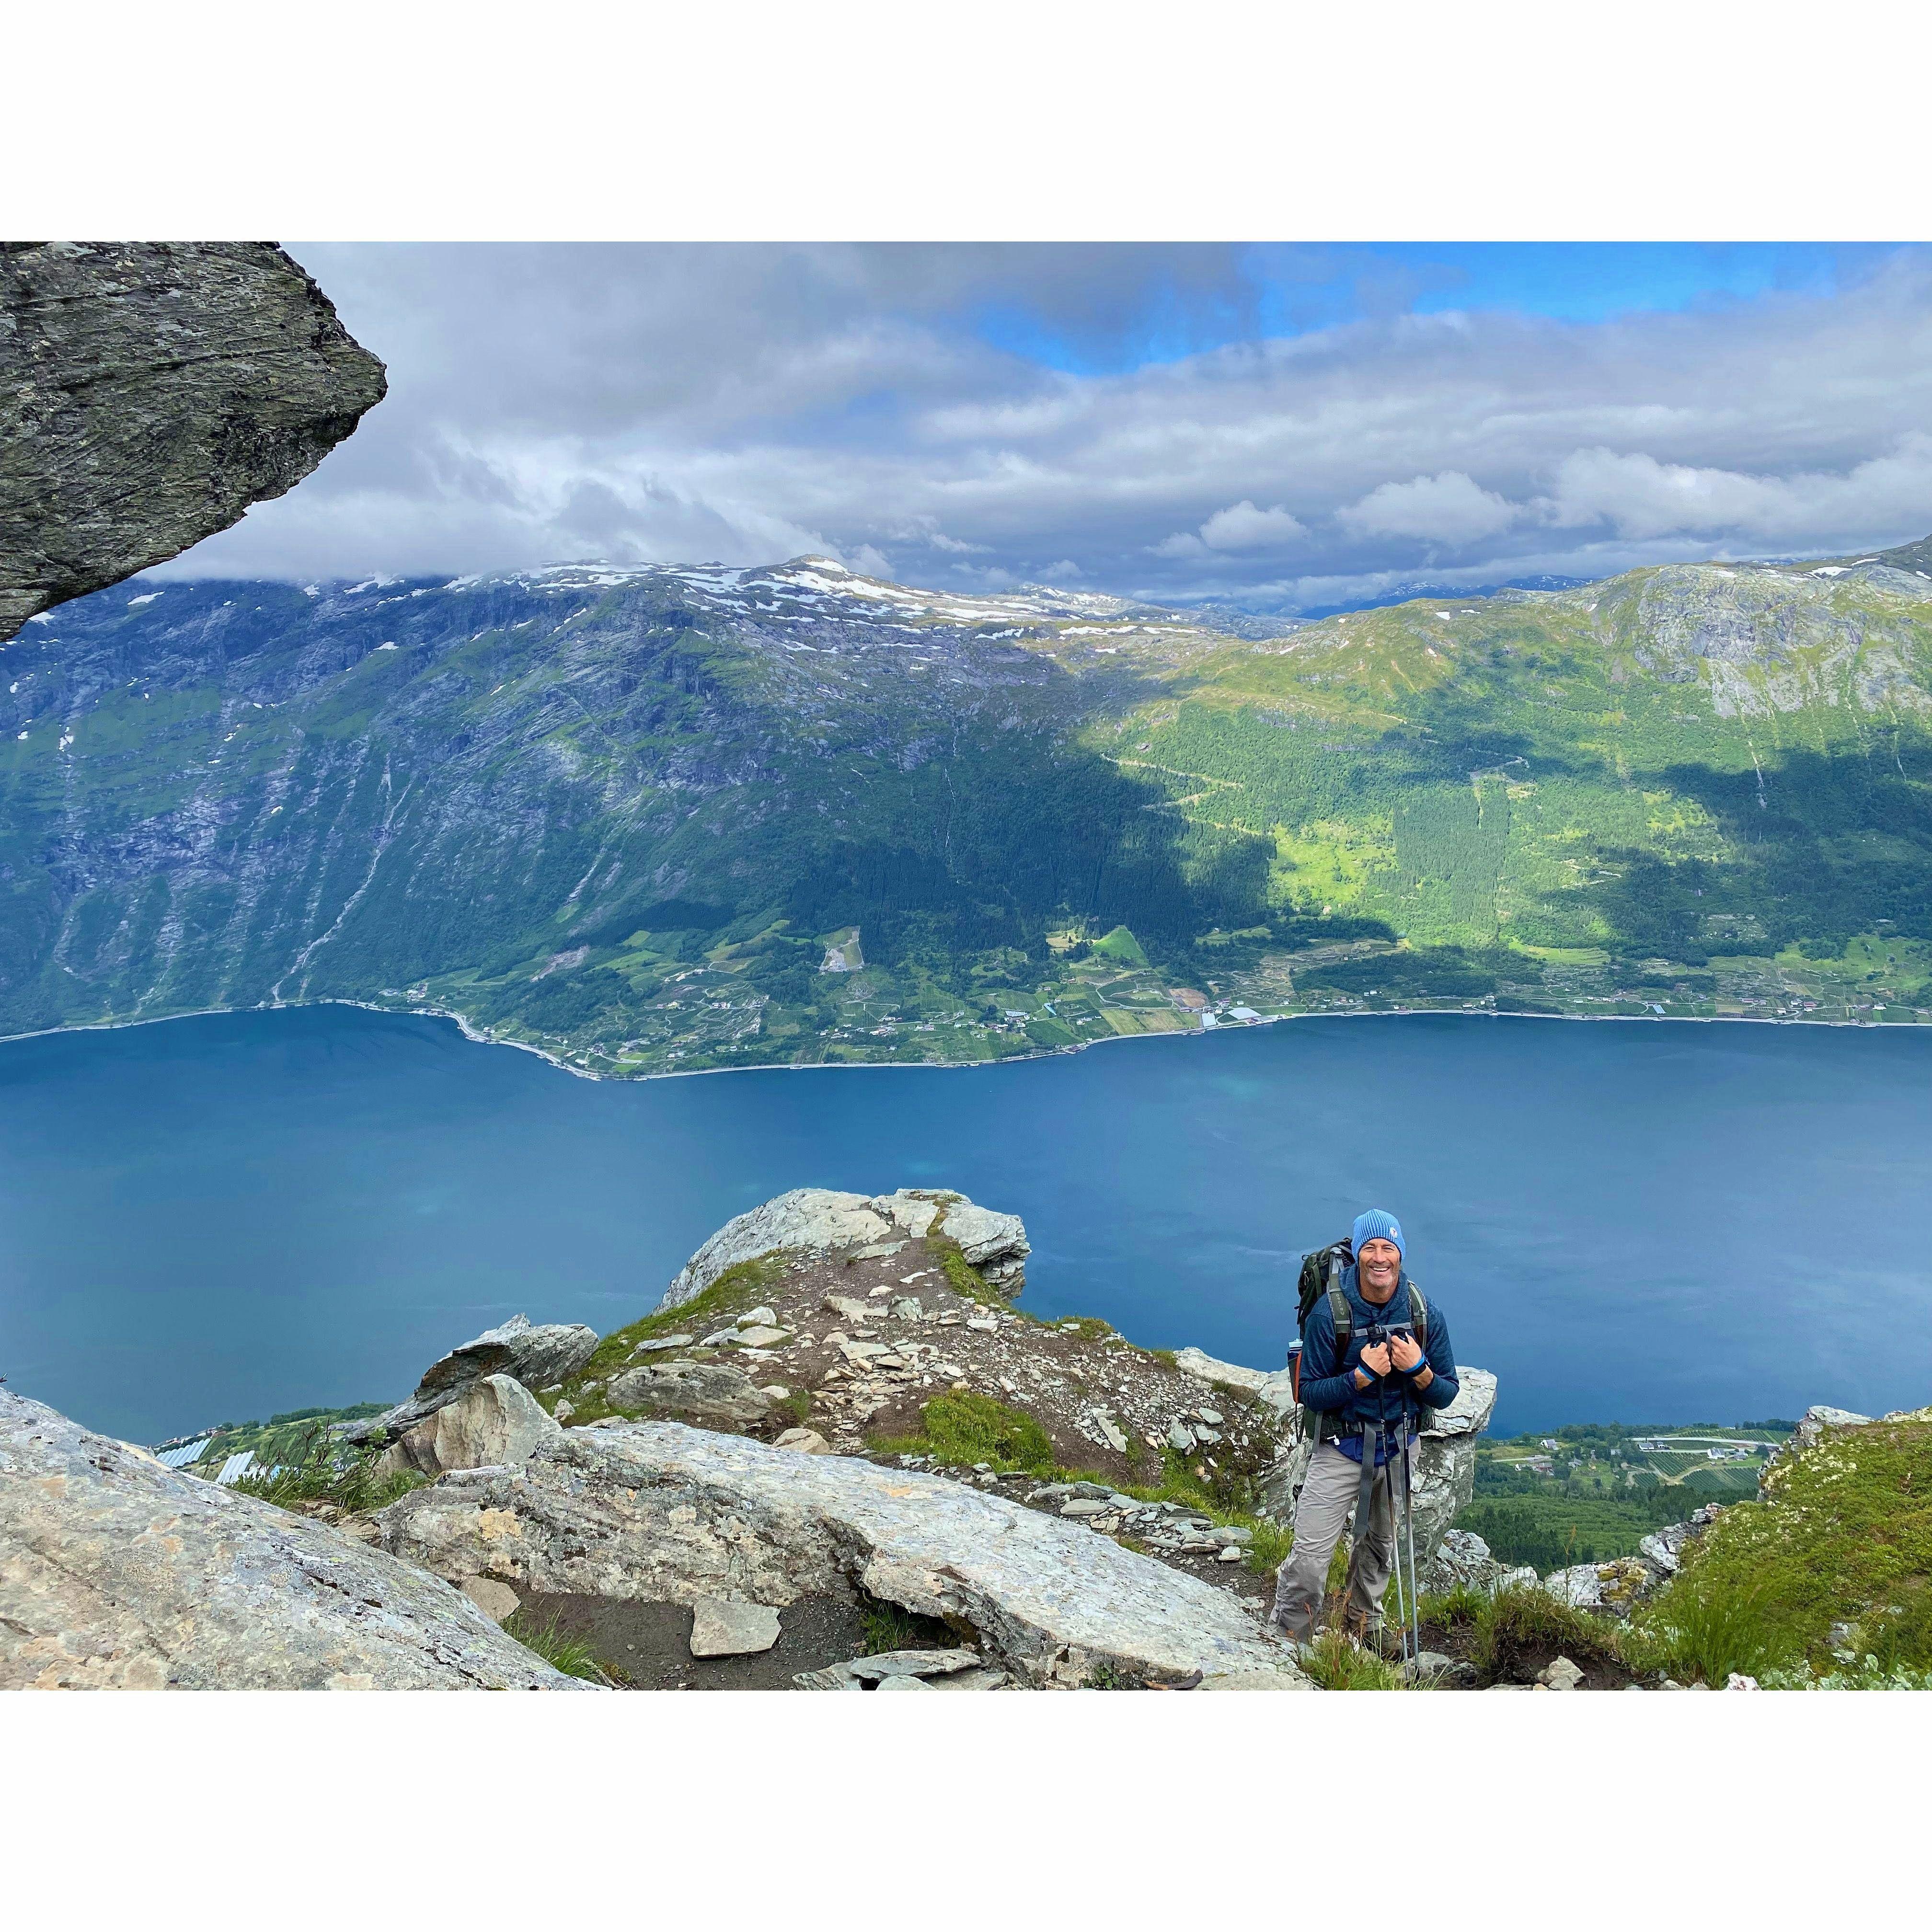 Hiking along a fjord in Norway.  July 2022.